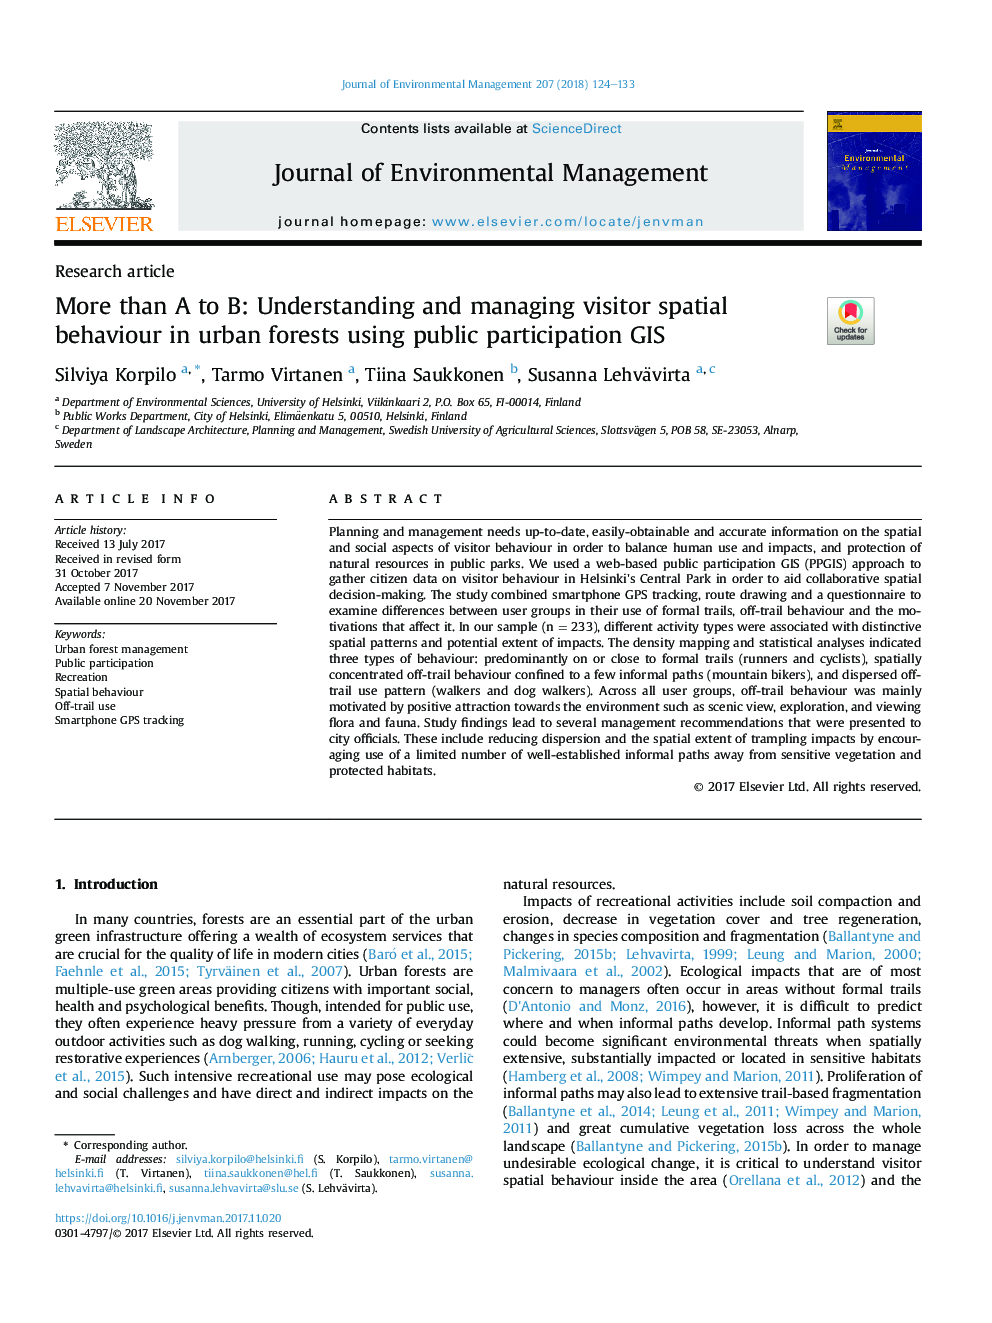 More than A to B: Understanding and managing visitor spatial behaviour in urban forests using public participation GIS